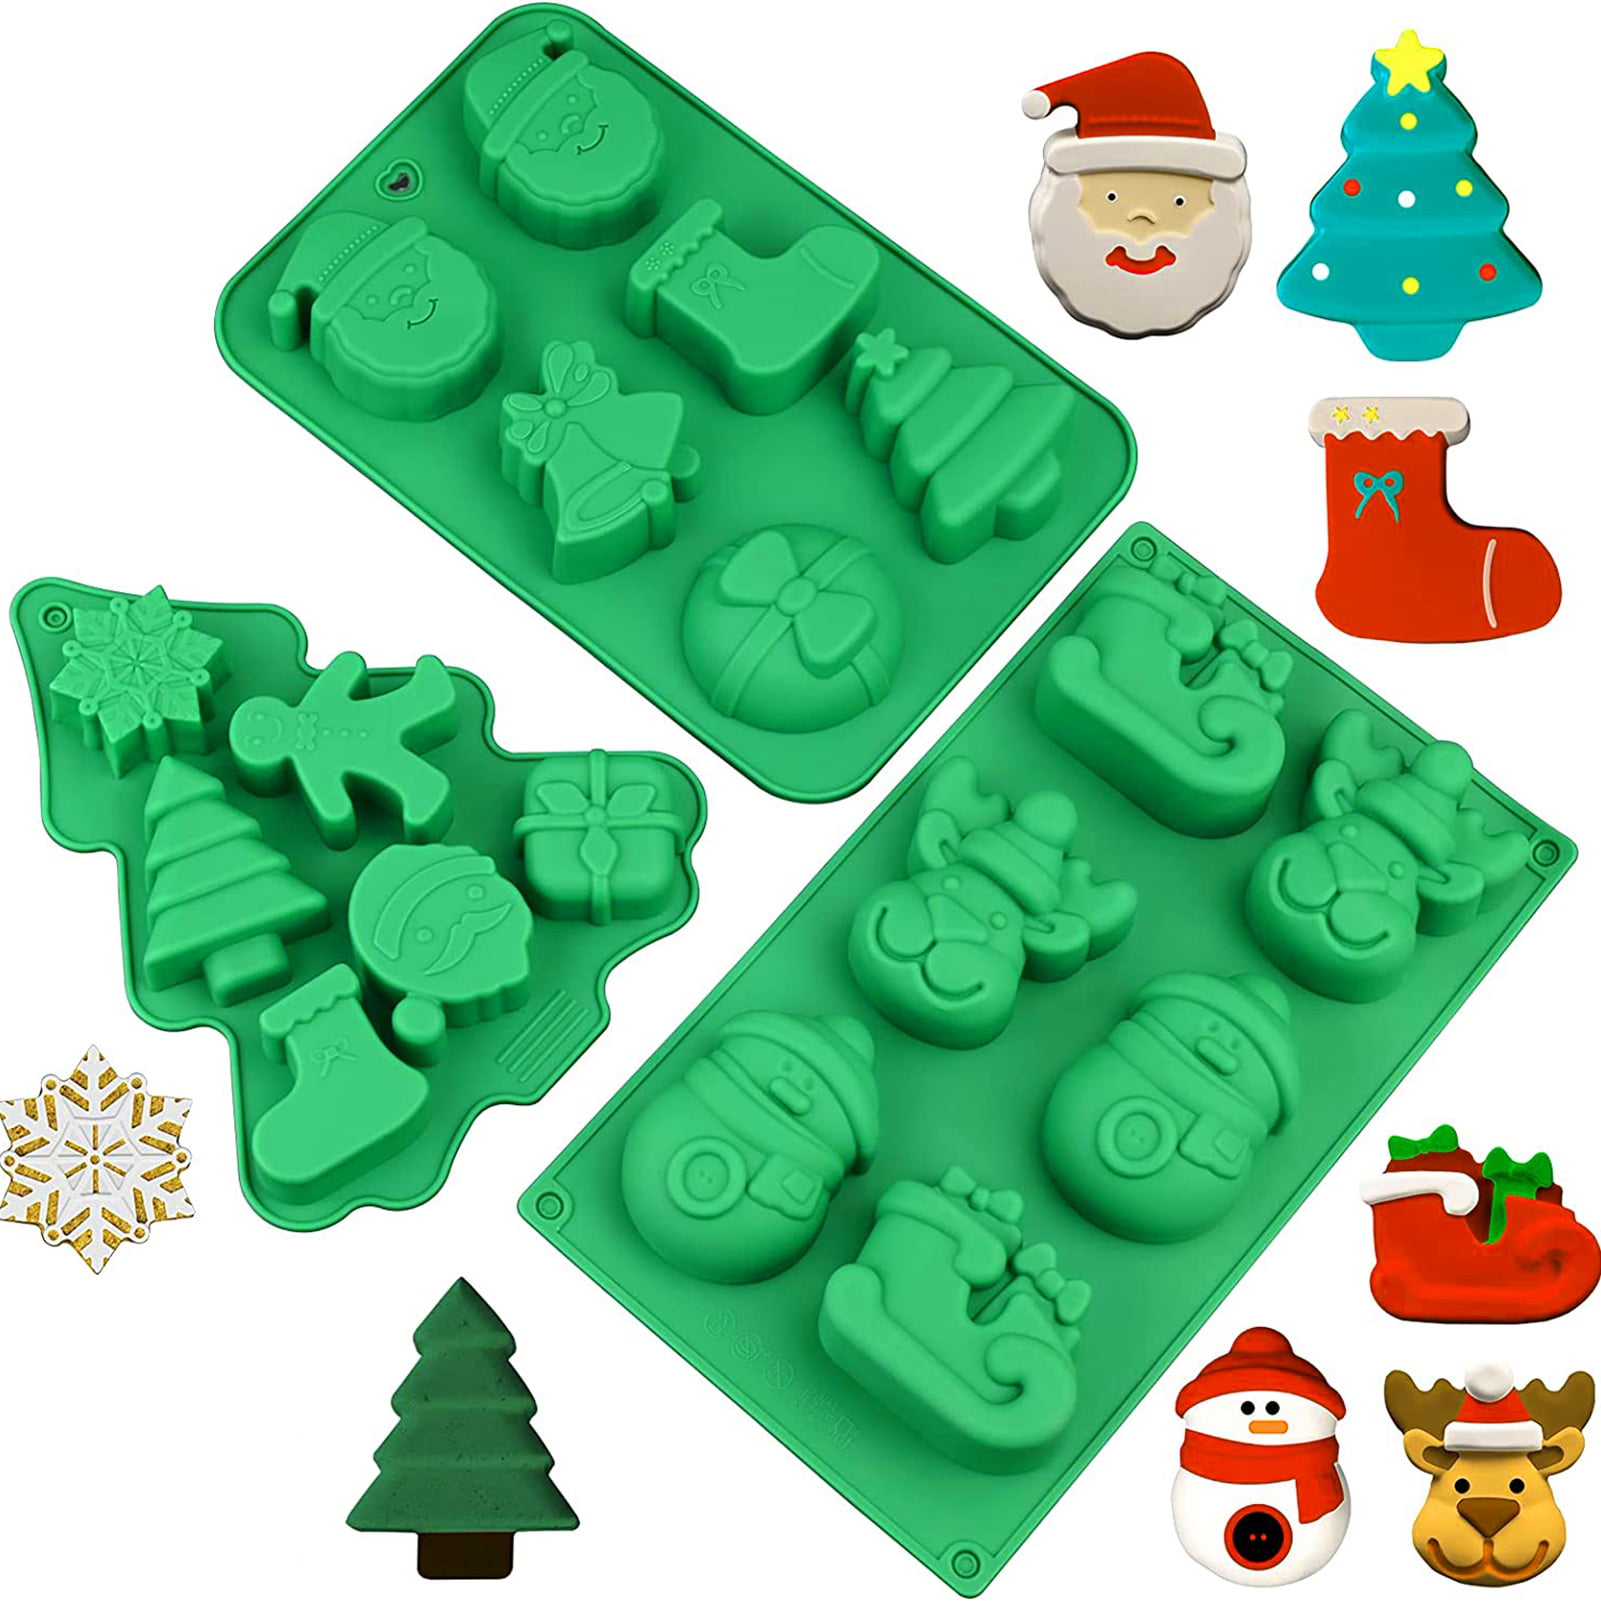 Jemomelo Moulds - The Home of Wax Melt Silicone Moulds